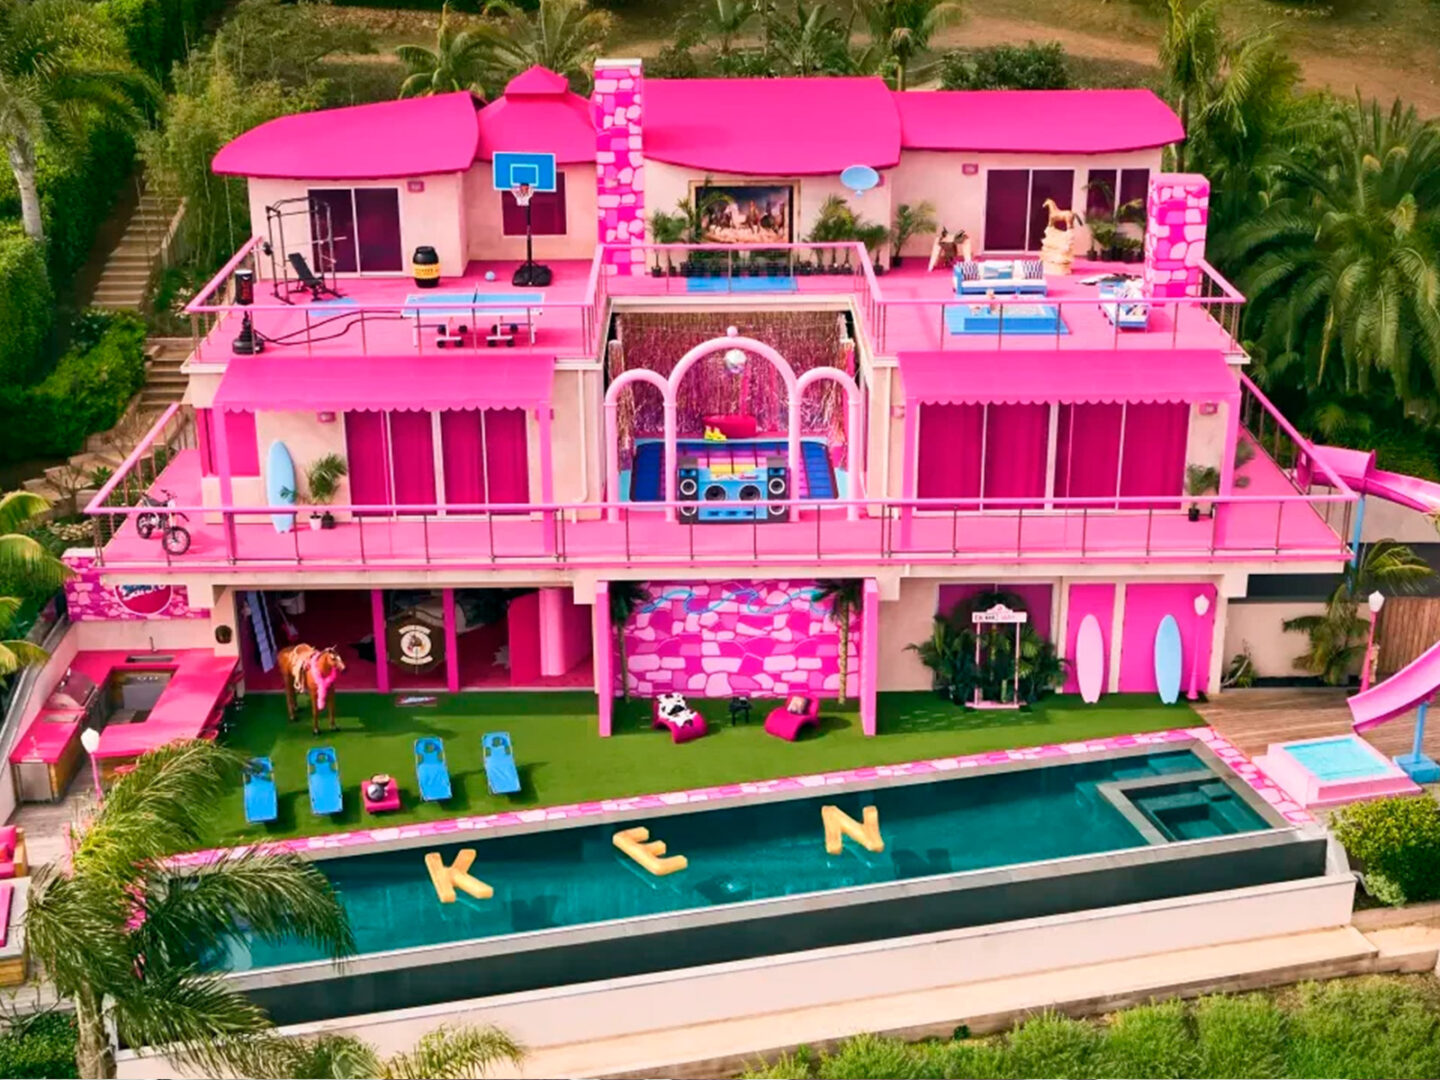 This is Airbnb’s new “Barbie House” in Malibu